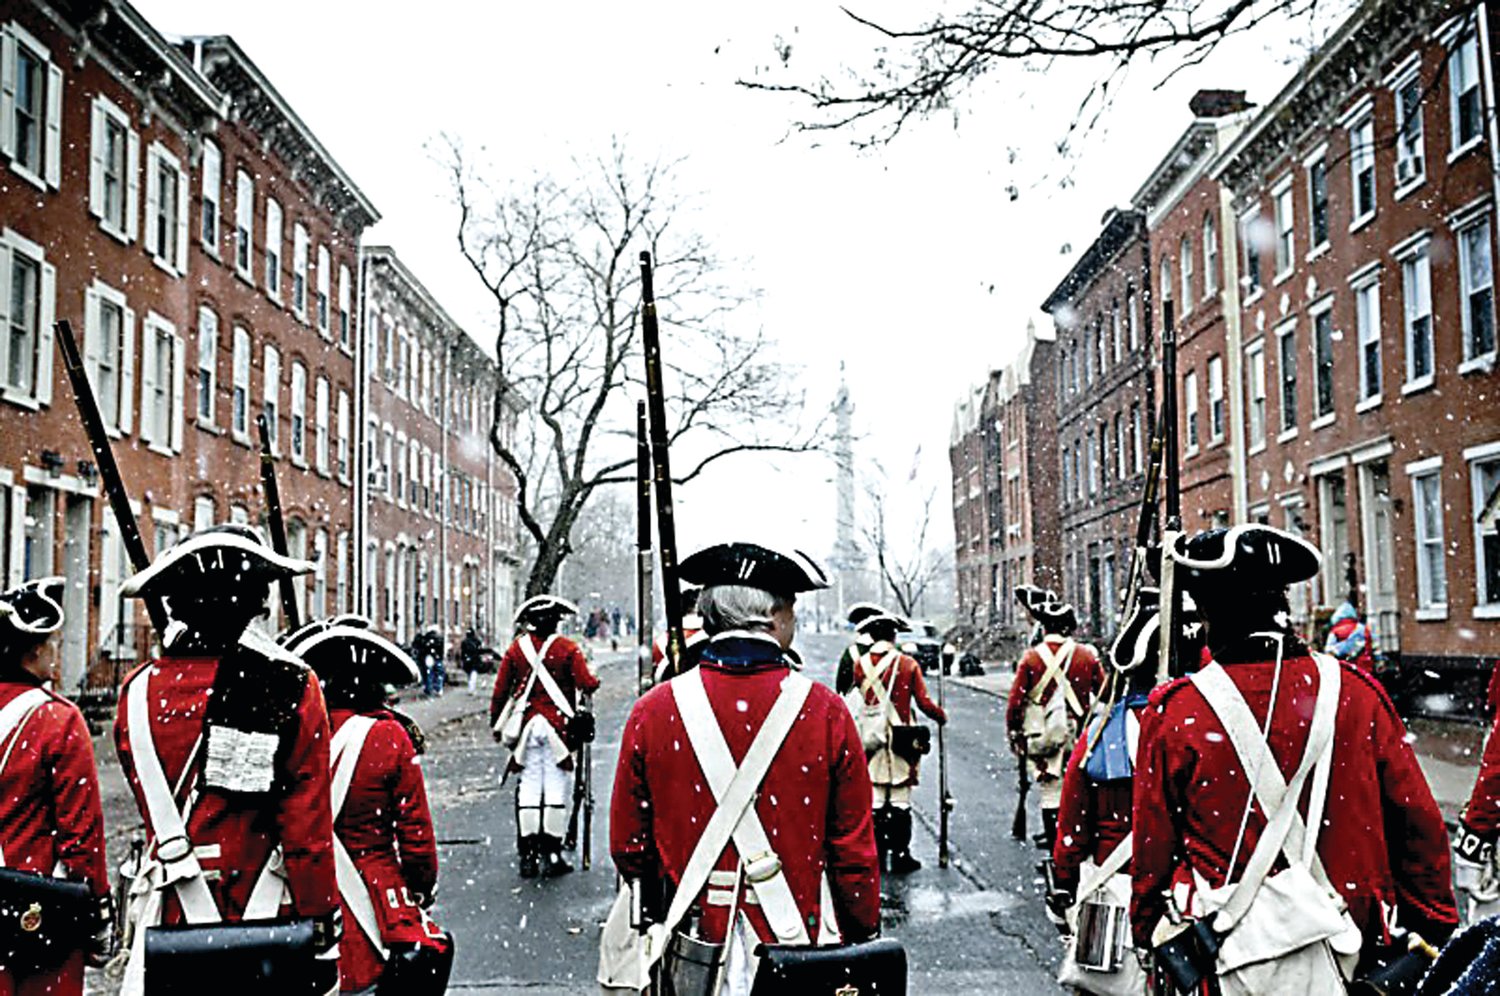 Reenactors portray soldiers who fought in the Battles of Trenton. Courtesy of Crossroads  of the American Revolution.